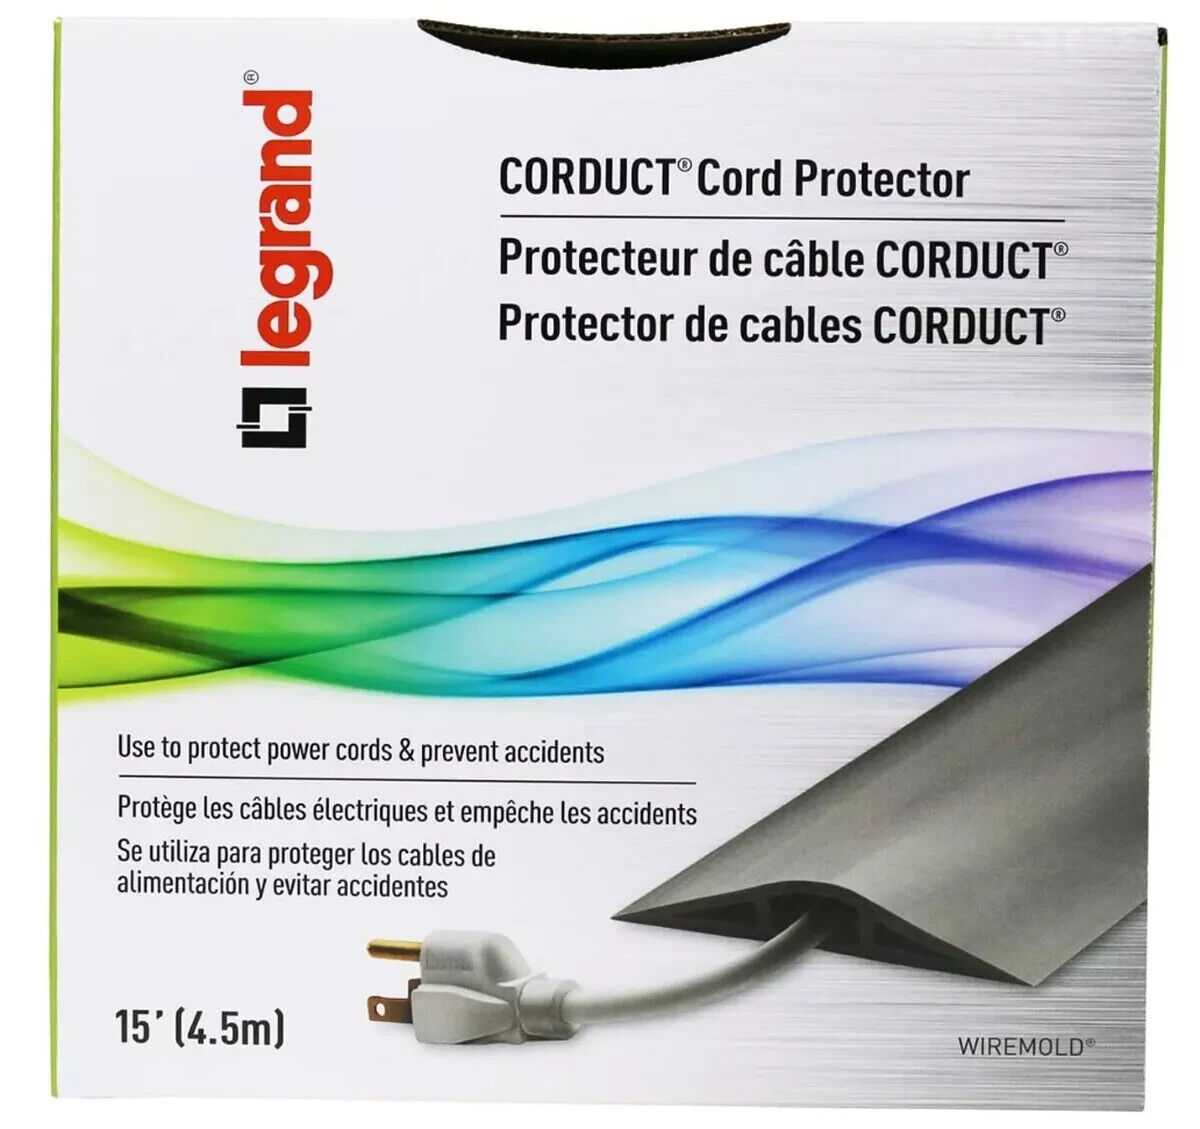 NEW Legrand Wiremold CDBK-15 Corduct 15 ft. Over-Floor Cord Protector gray